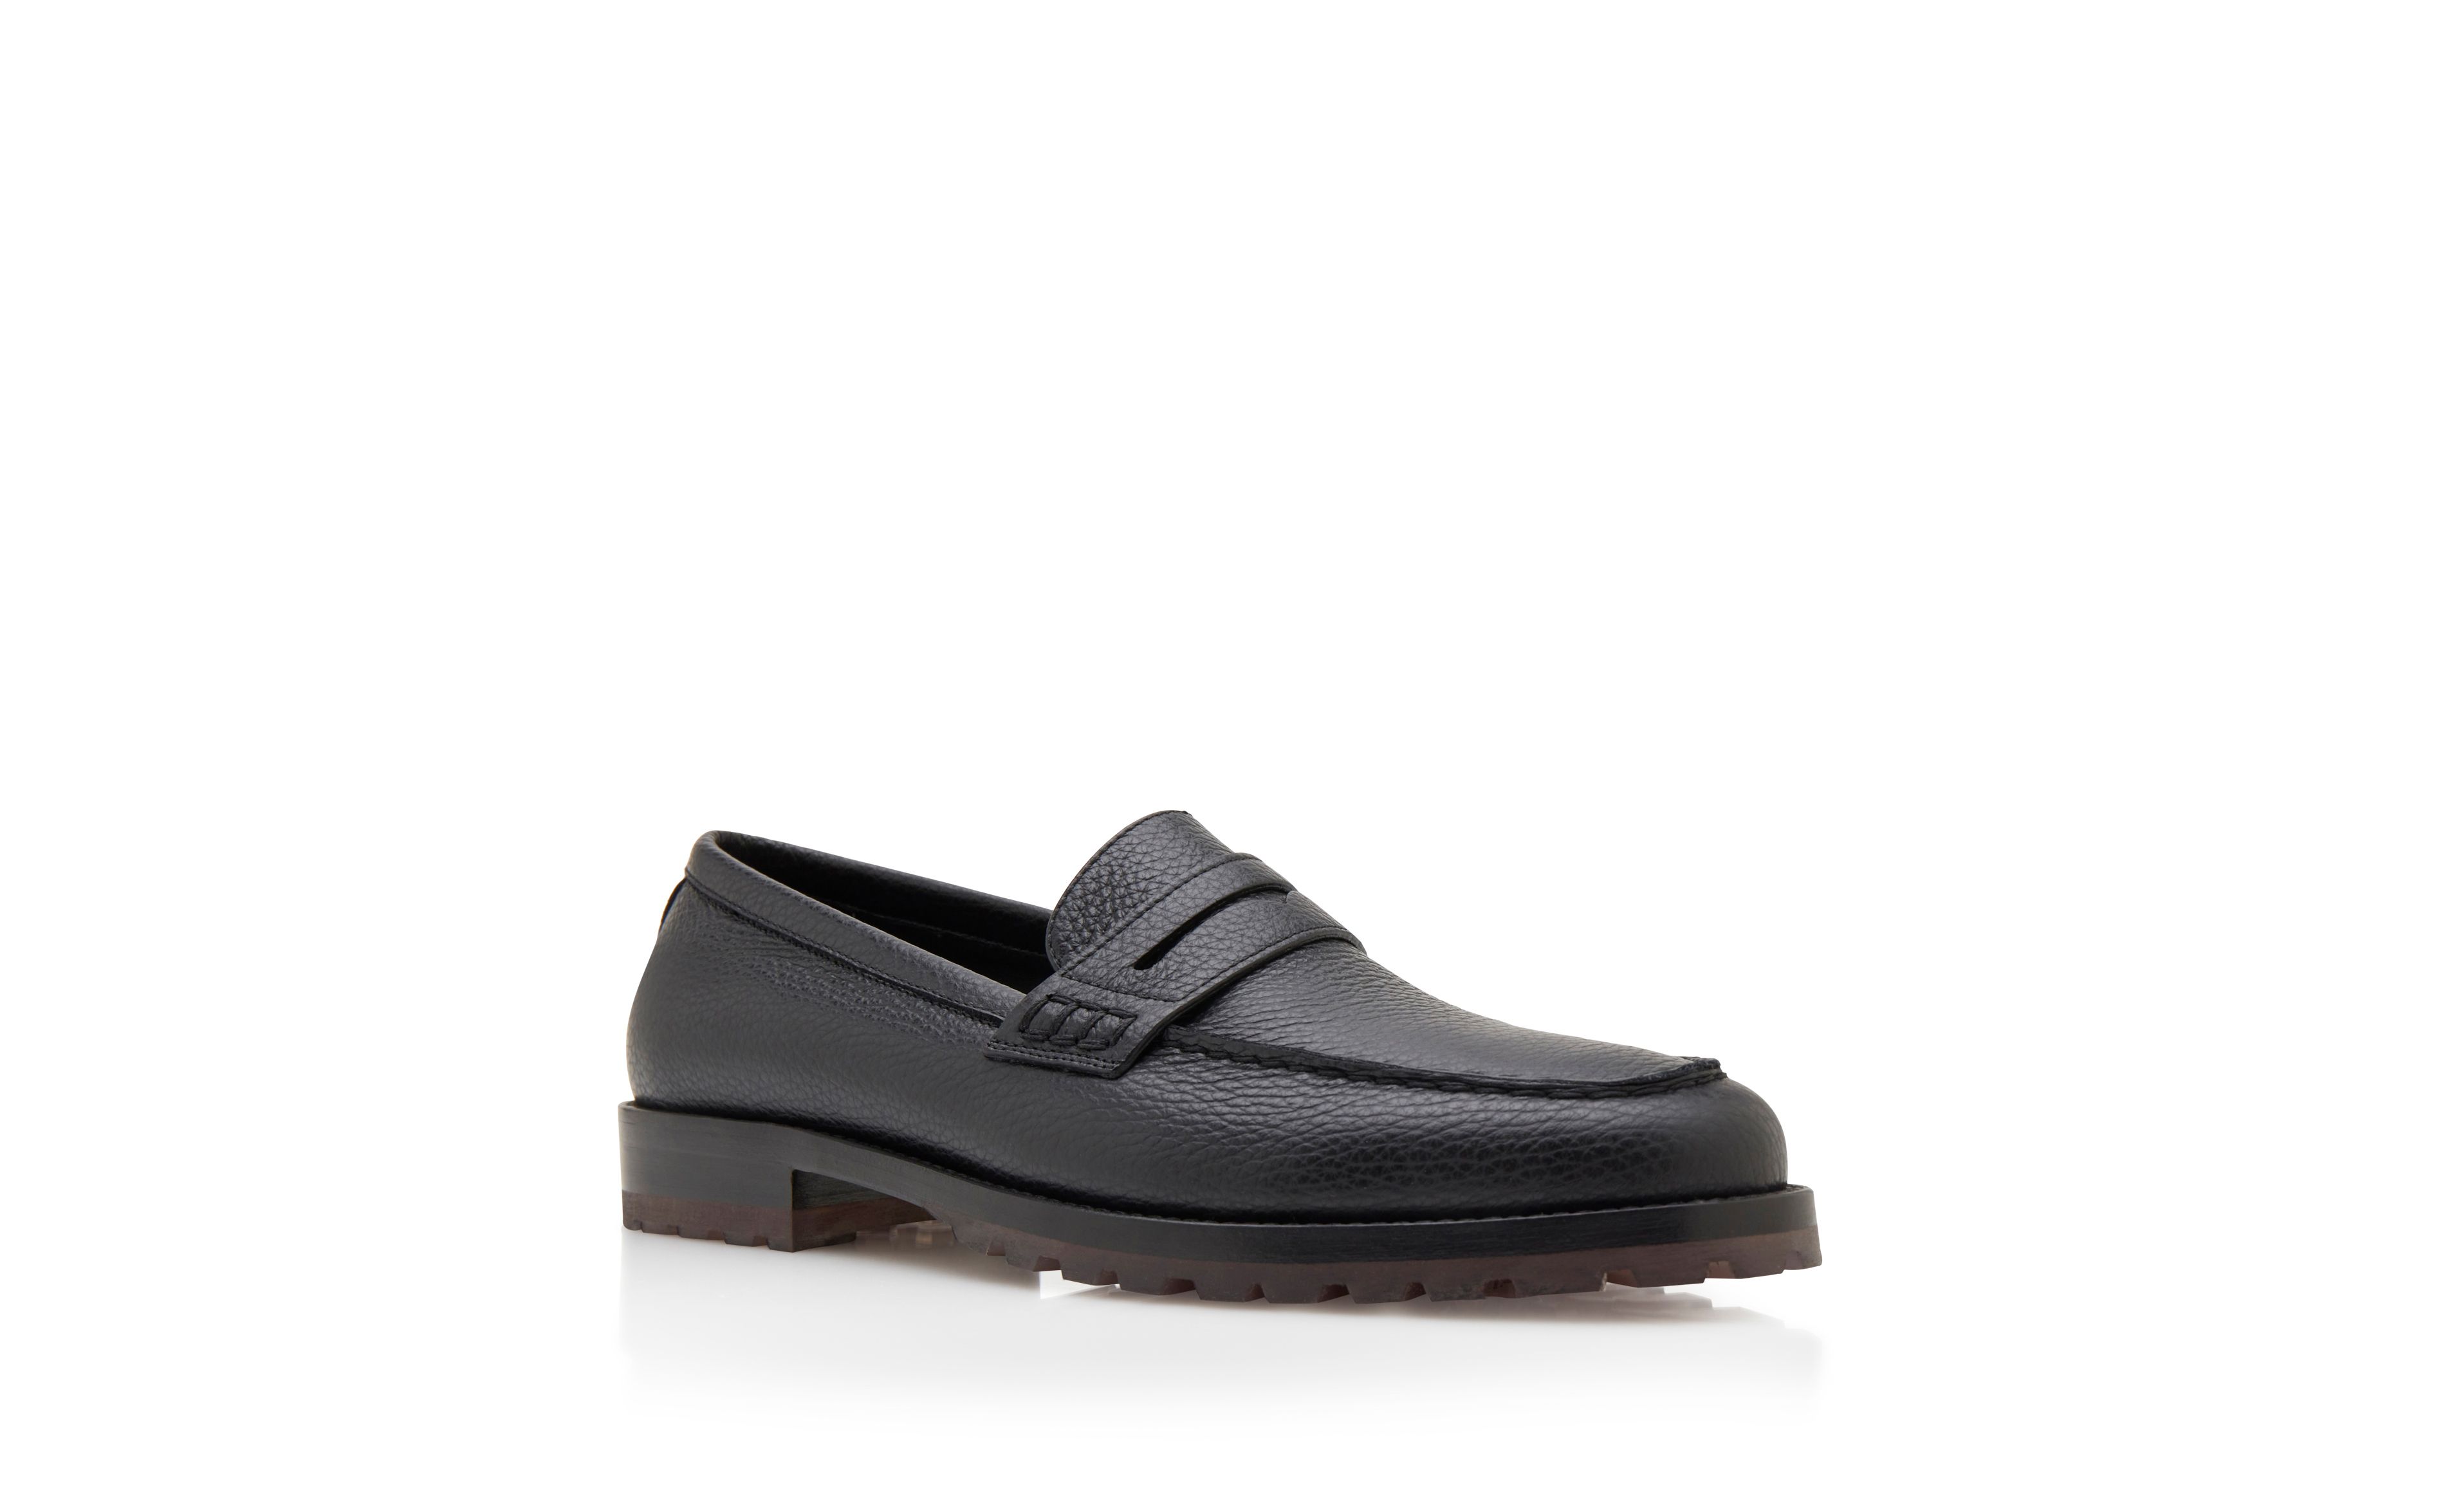 The Penny Loafer - Black Calf - Rubber Sole